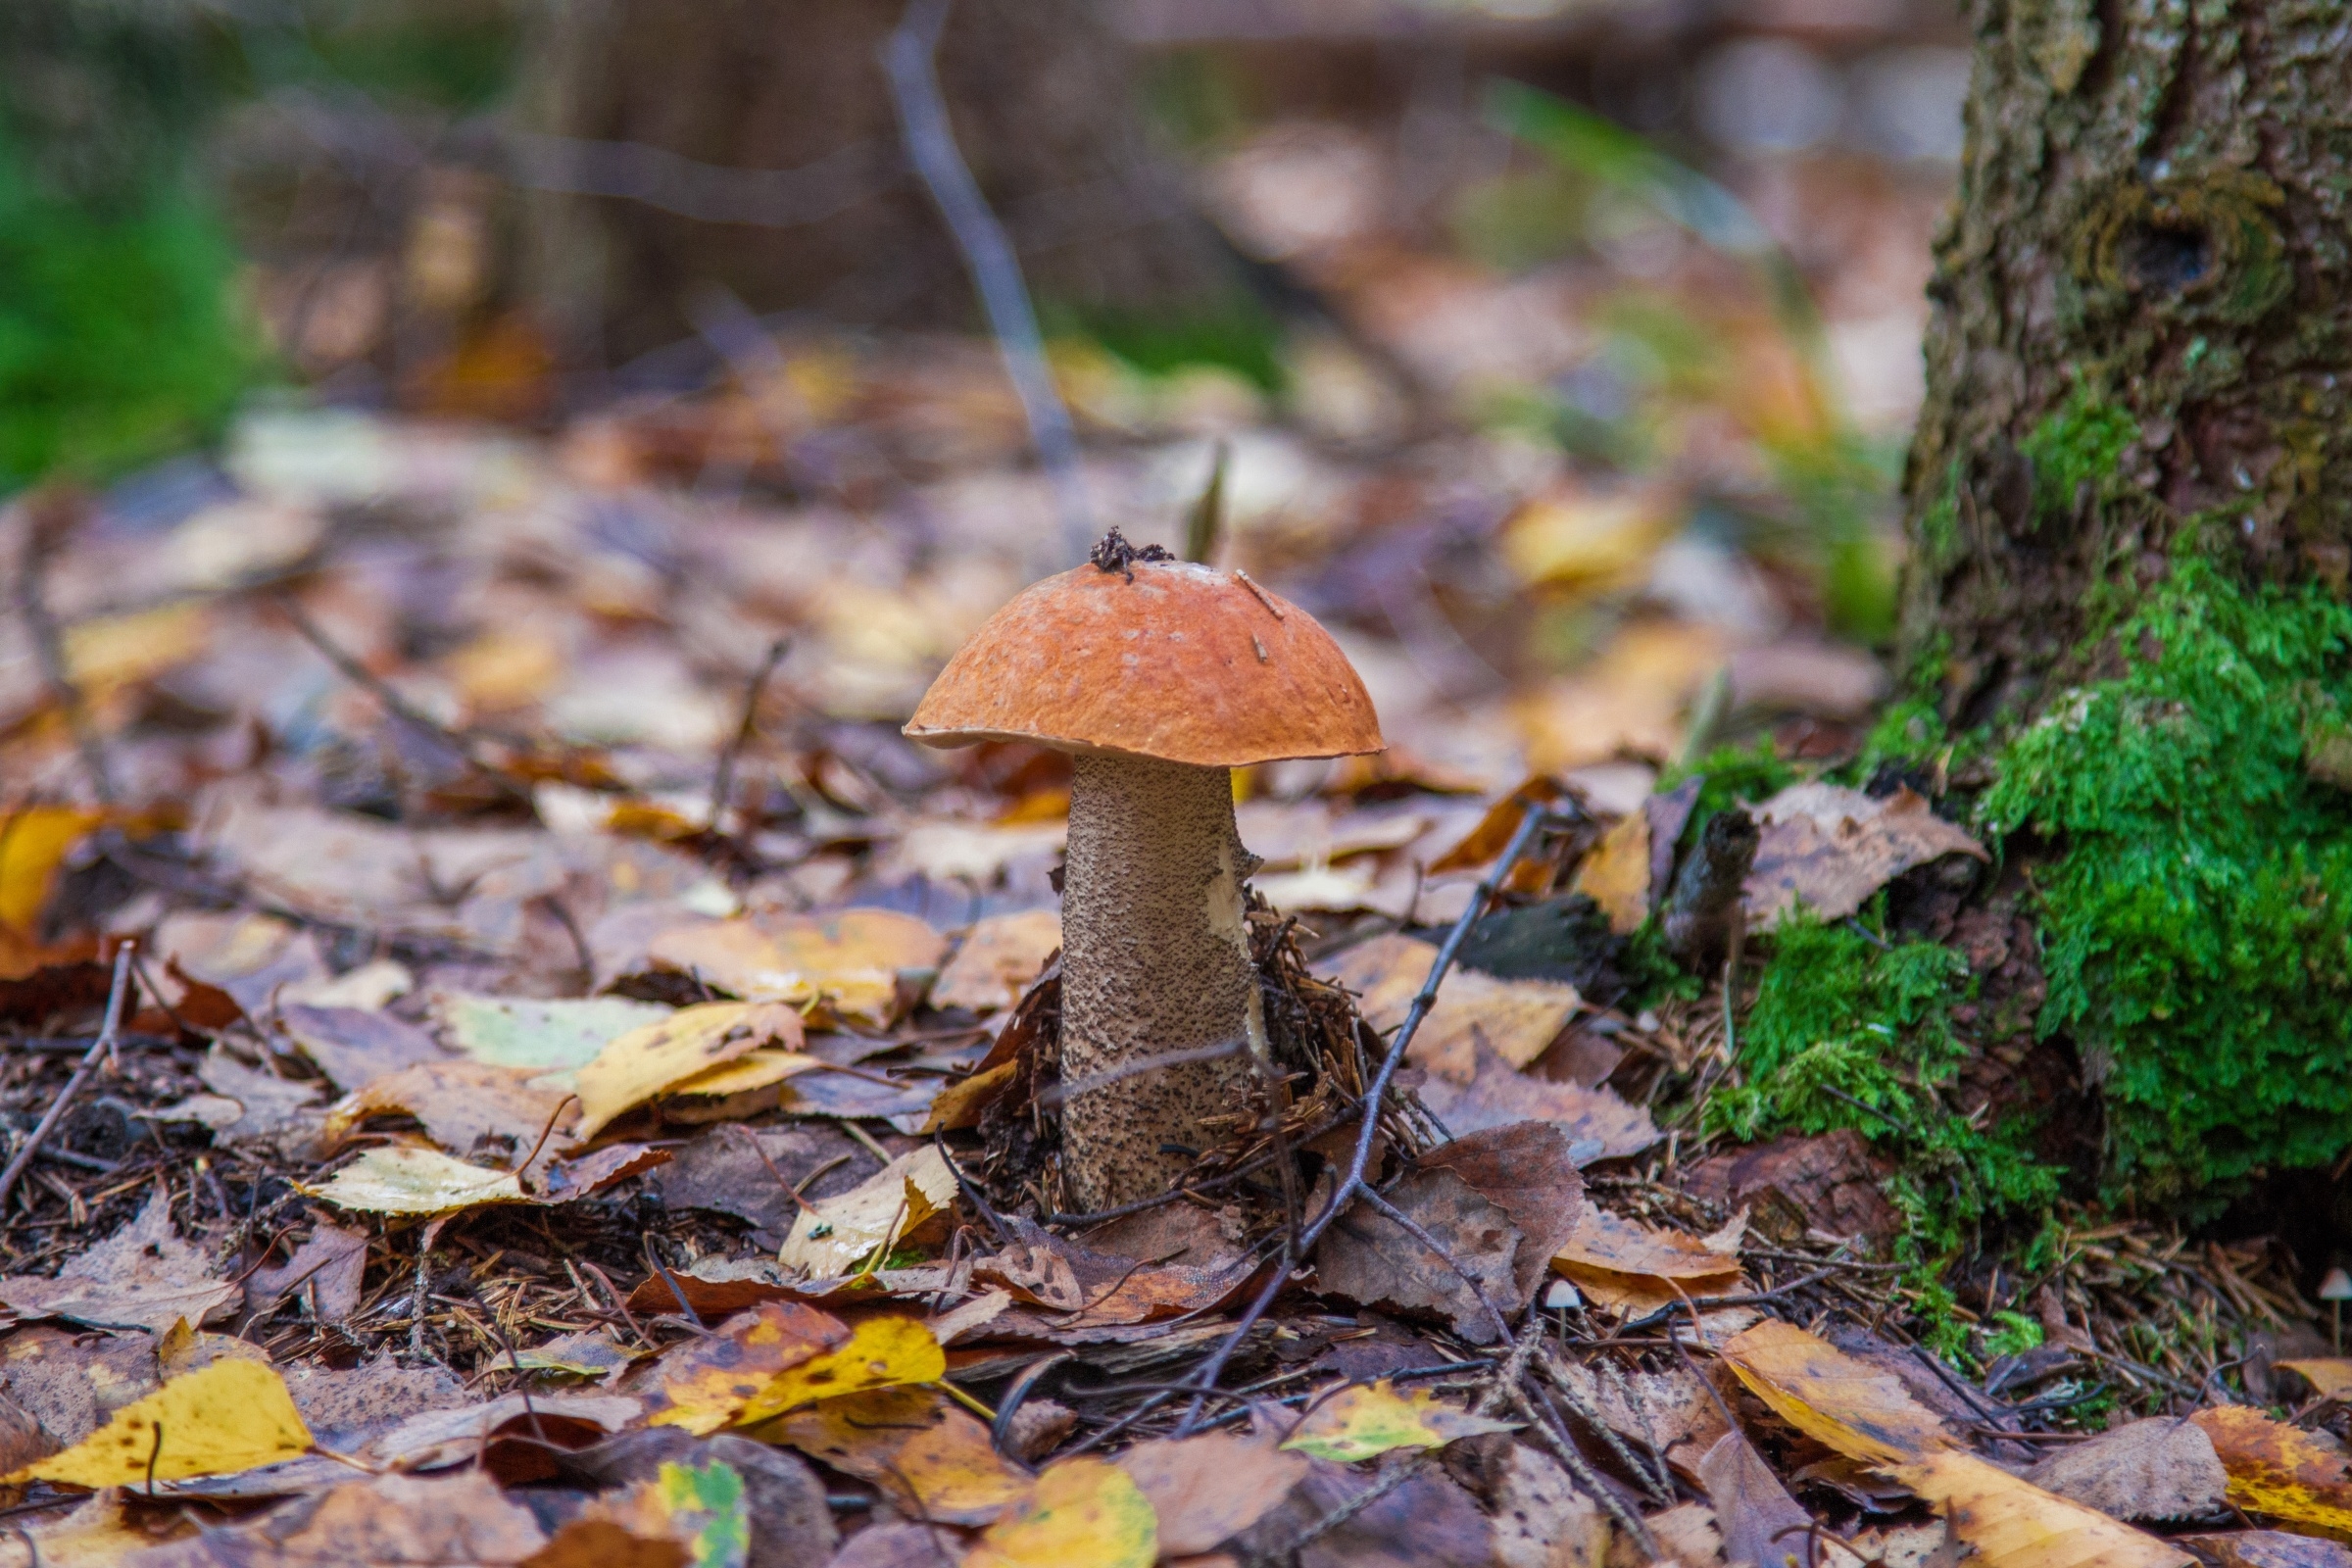 A lonely mushroom among the fallen leaves